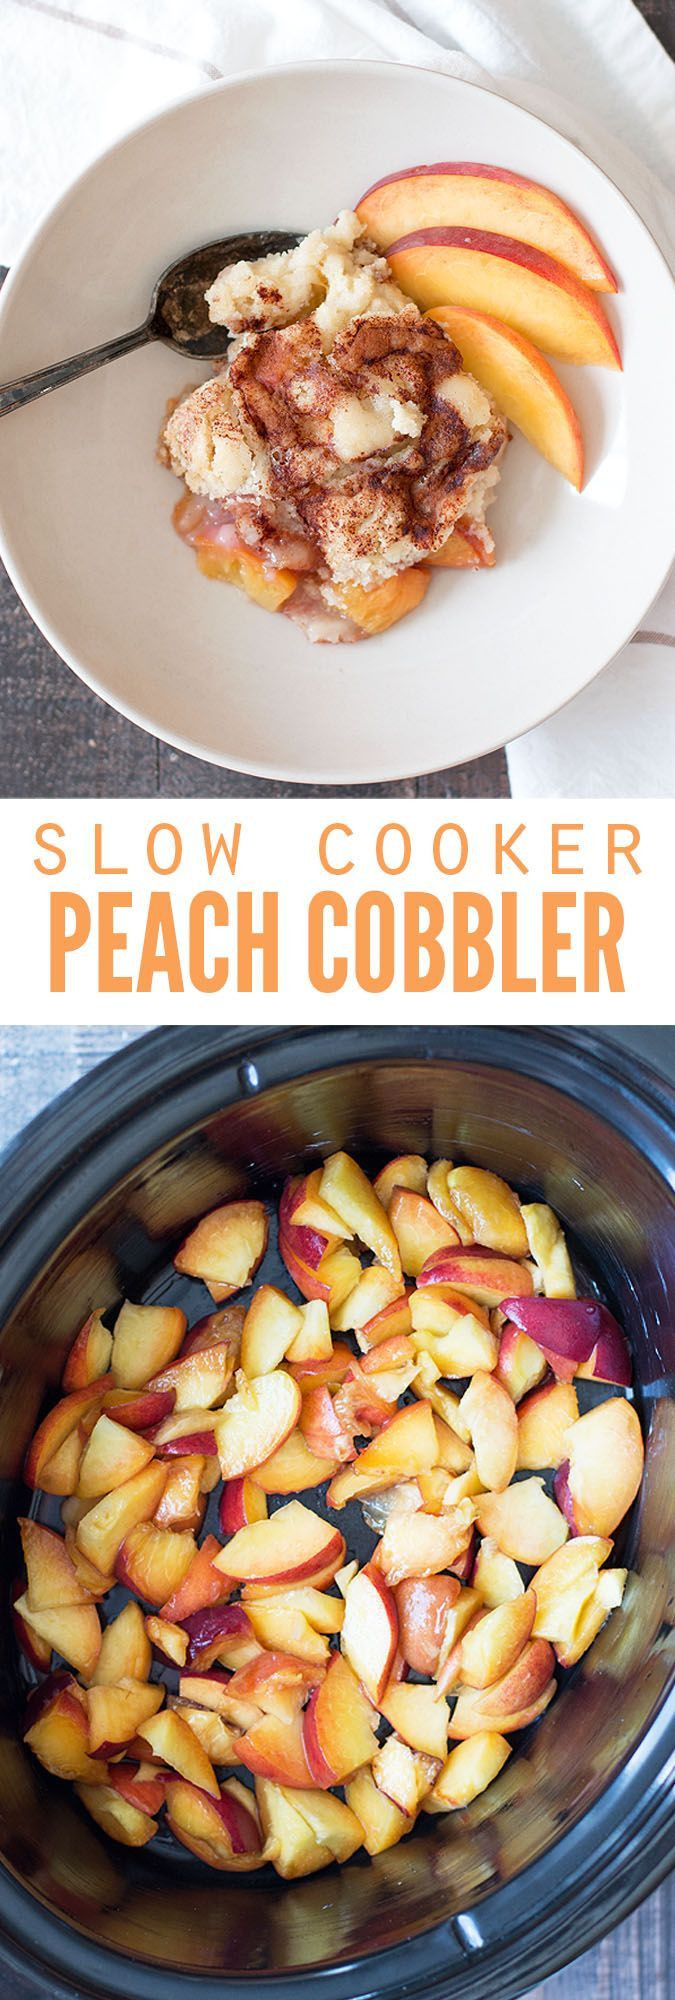 Slow Cooker Cake Recipes With Yellow Cake Mix
 Slow Cooker Peach Cobbler Recipe